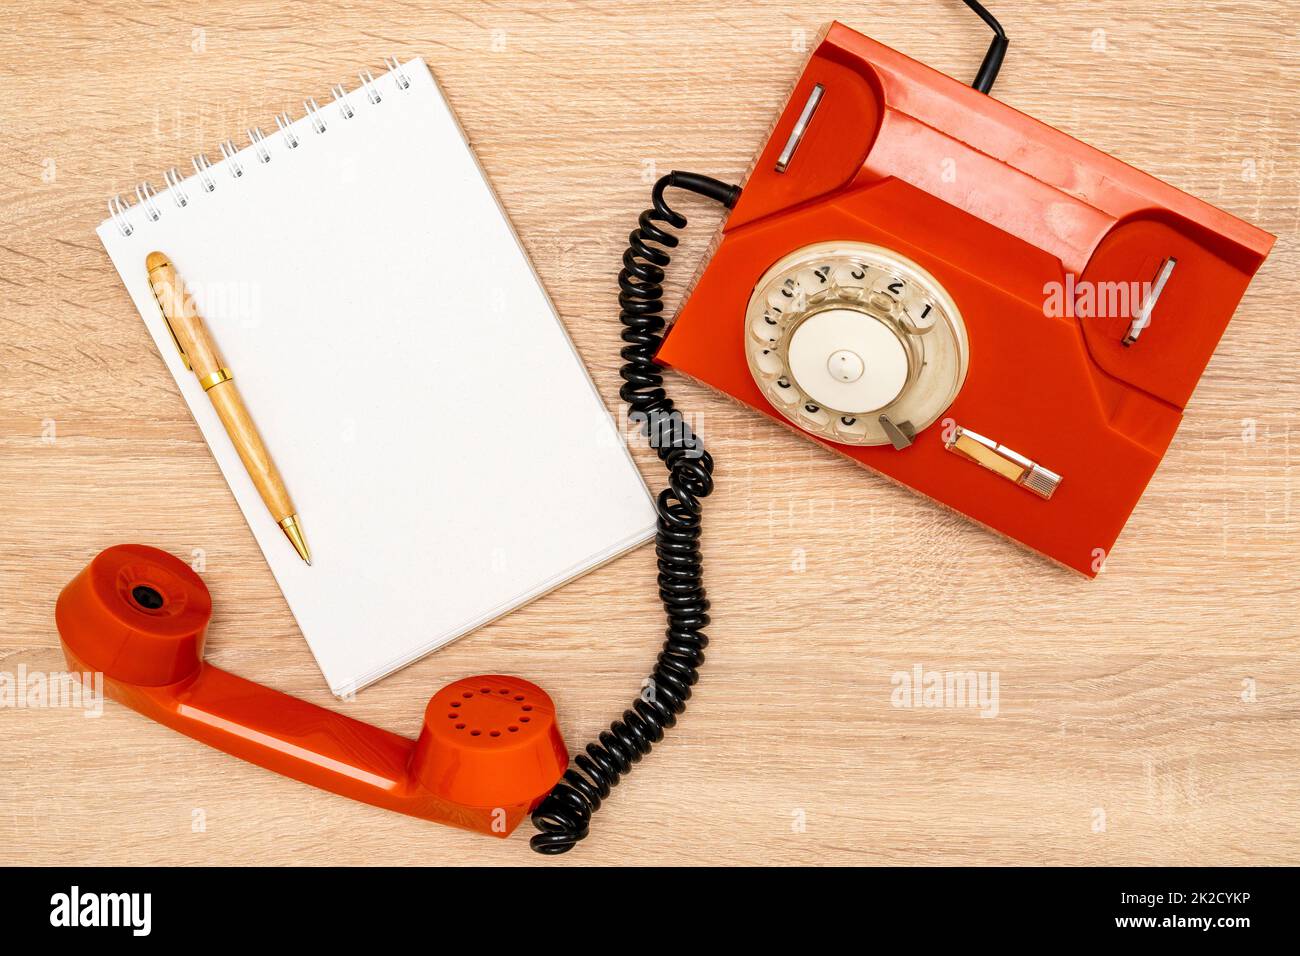 Orange rotary telephone and blank notebook on wooden background Stock Photo